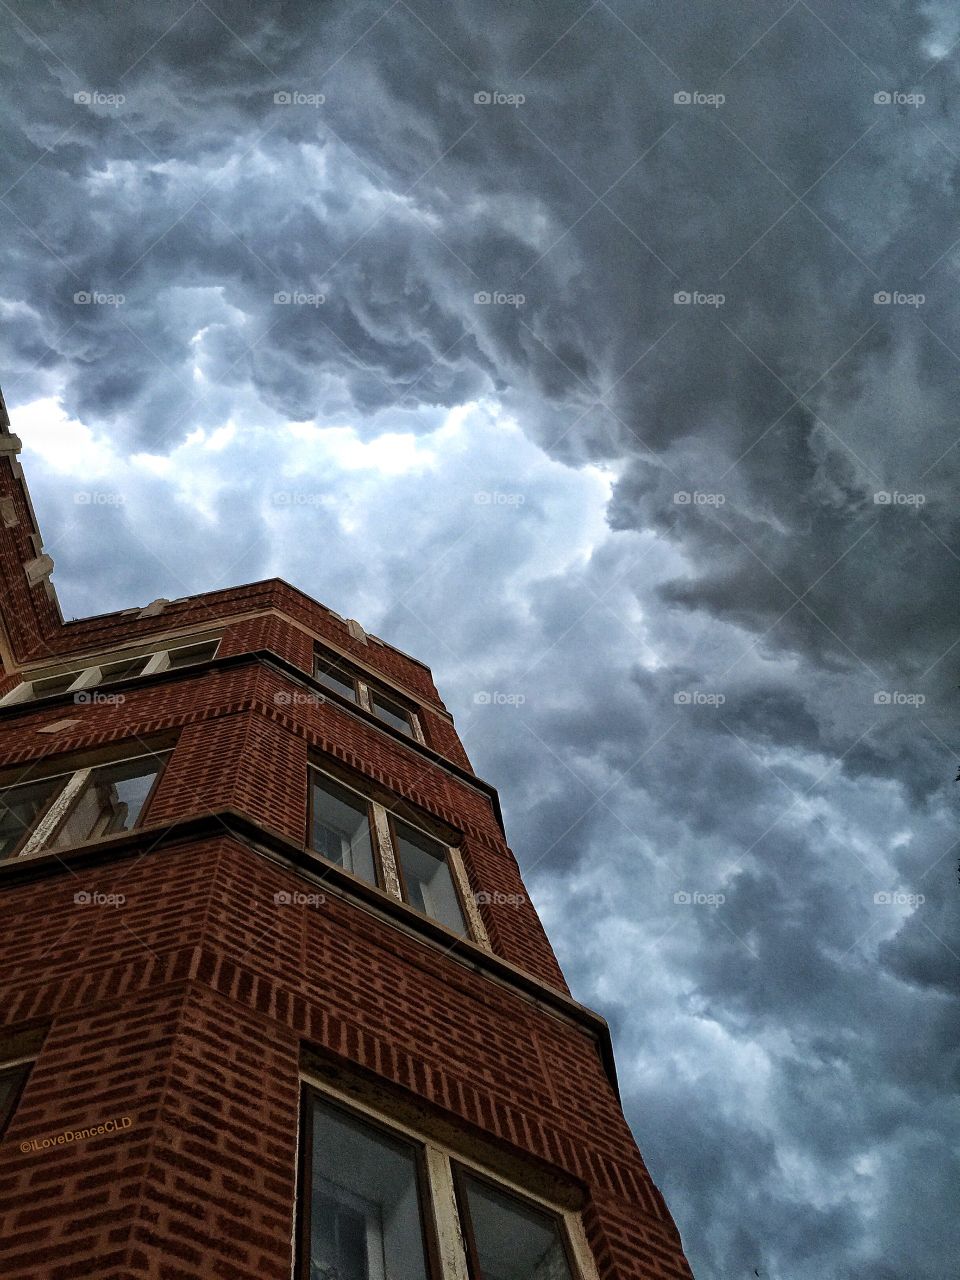 Looking up into the heart of a severe thunderstorm in South Shore, Chicago.